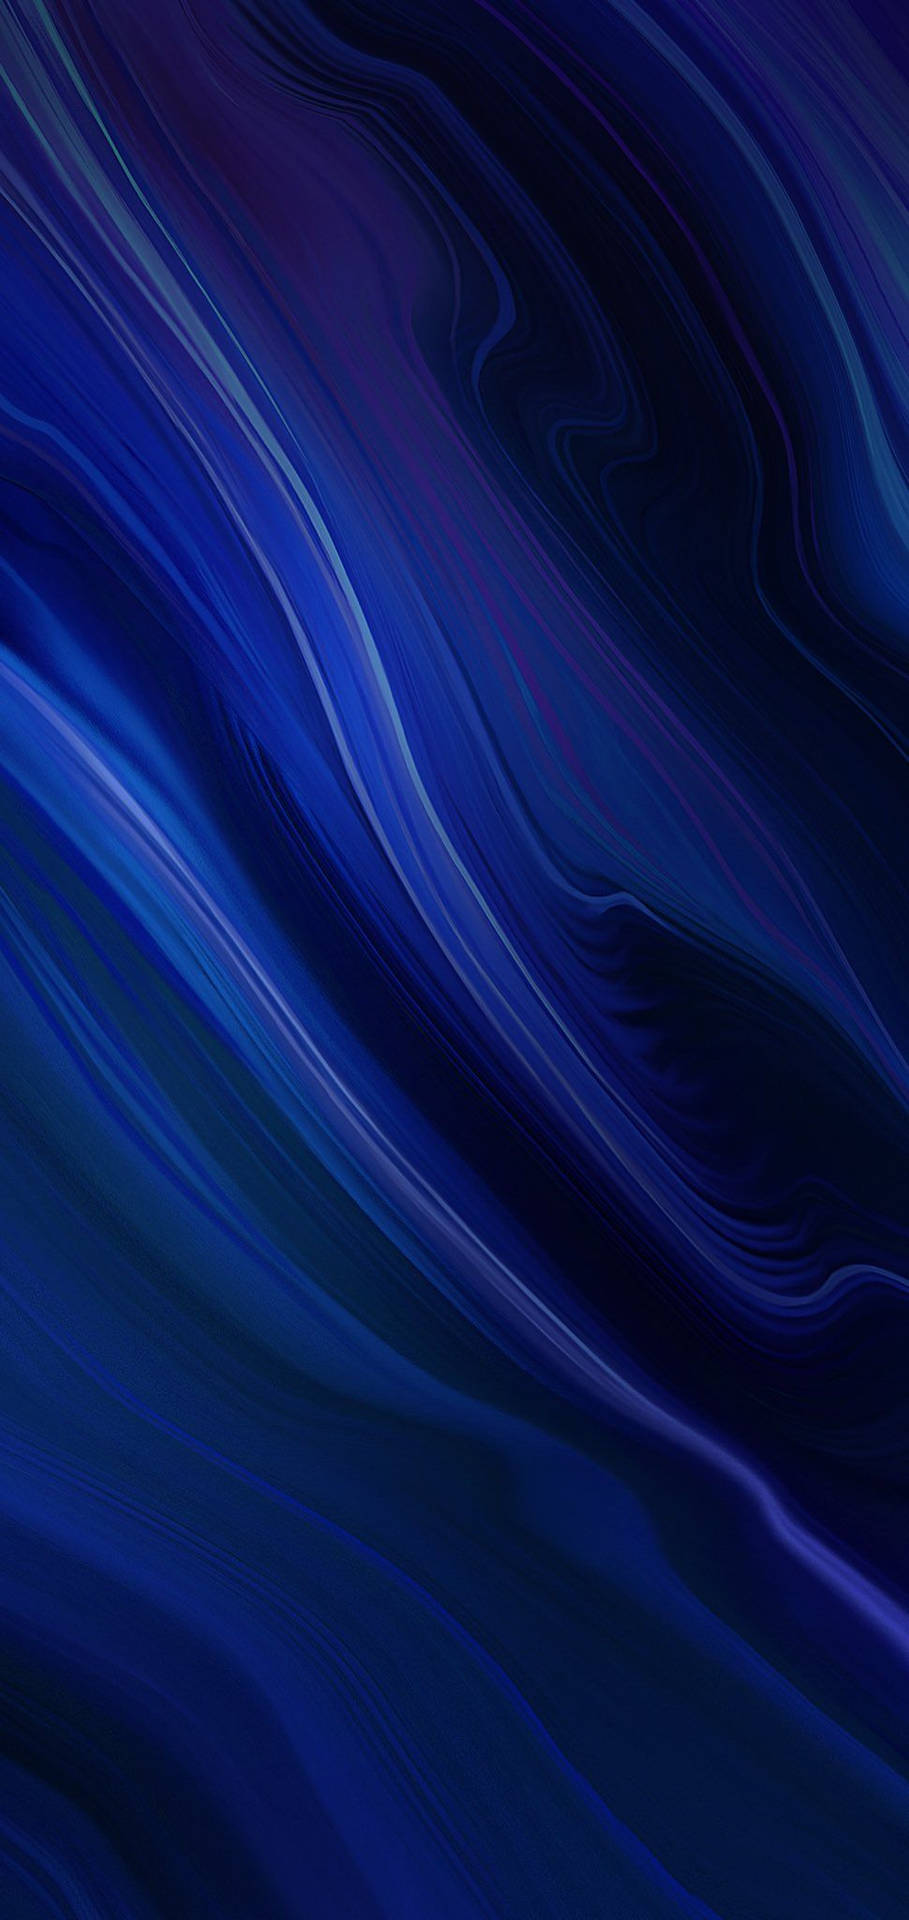 Swirling Colour Blue Iphone Background